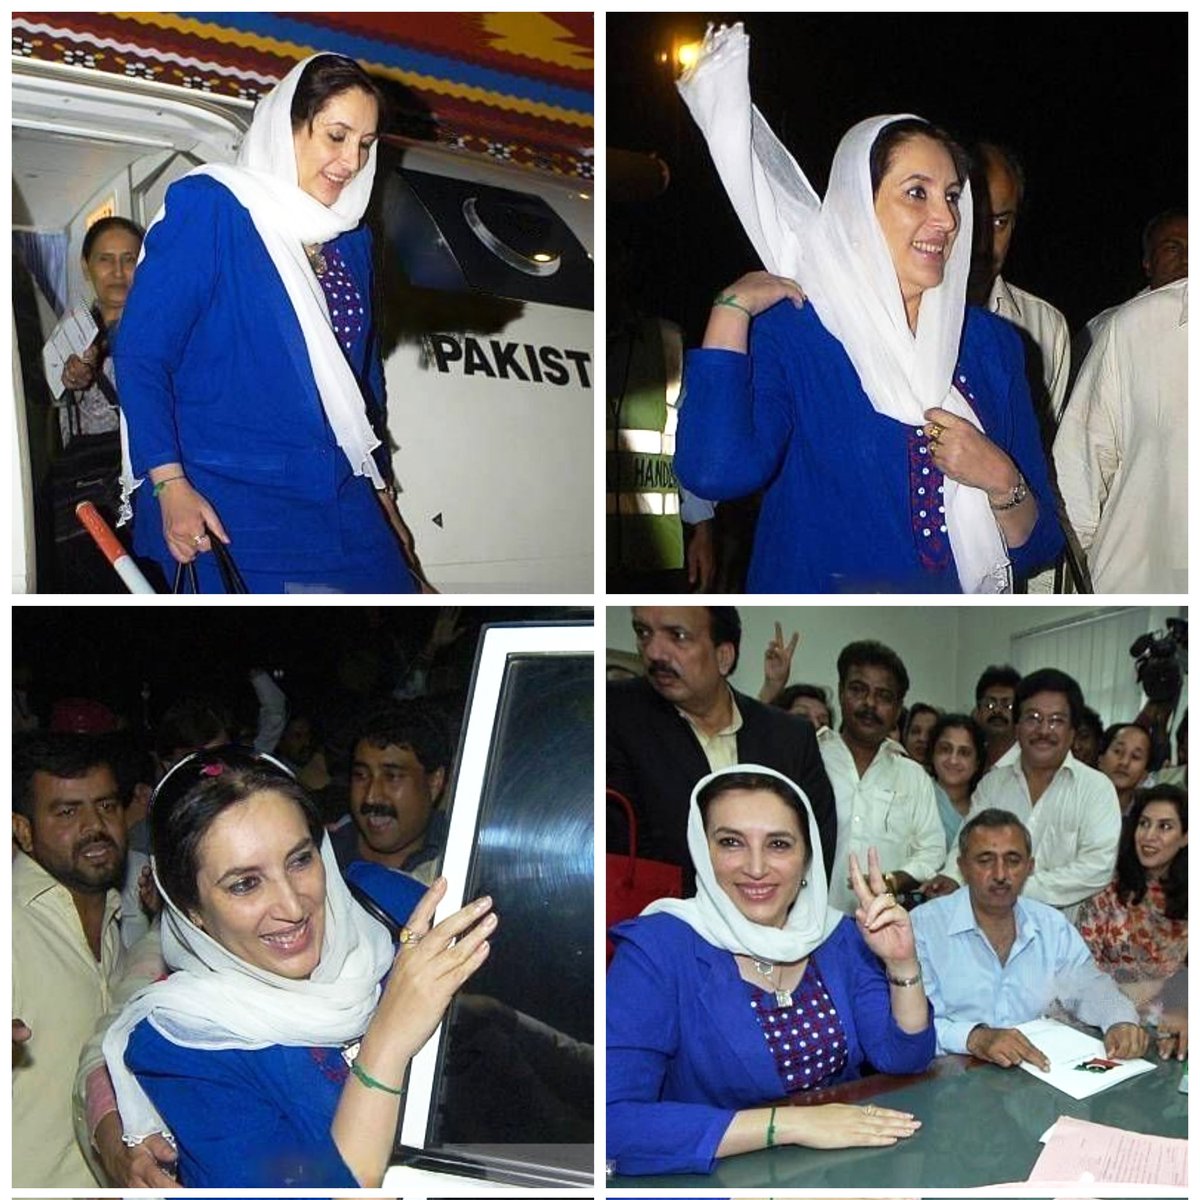 Shaheed Mohtarma Benazir Bhutto reached at Larkana Moen-Jo-Daro airport after submitting her nomination form to the Provincial Election Commissioner at Karachi in 25 Nov-2007